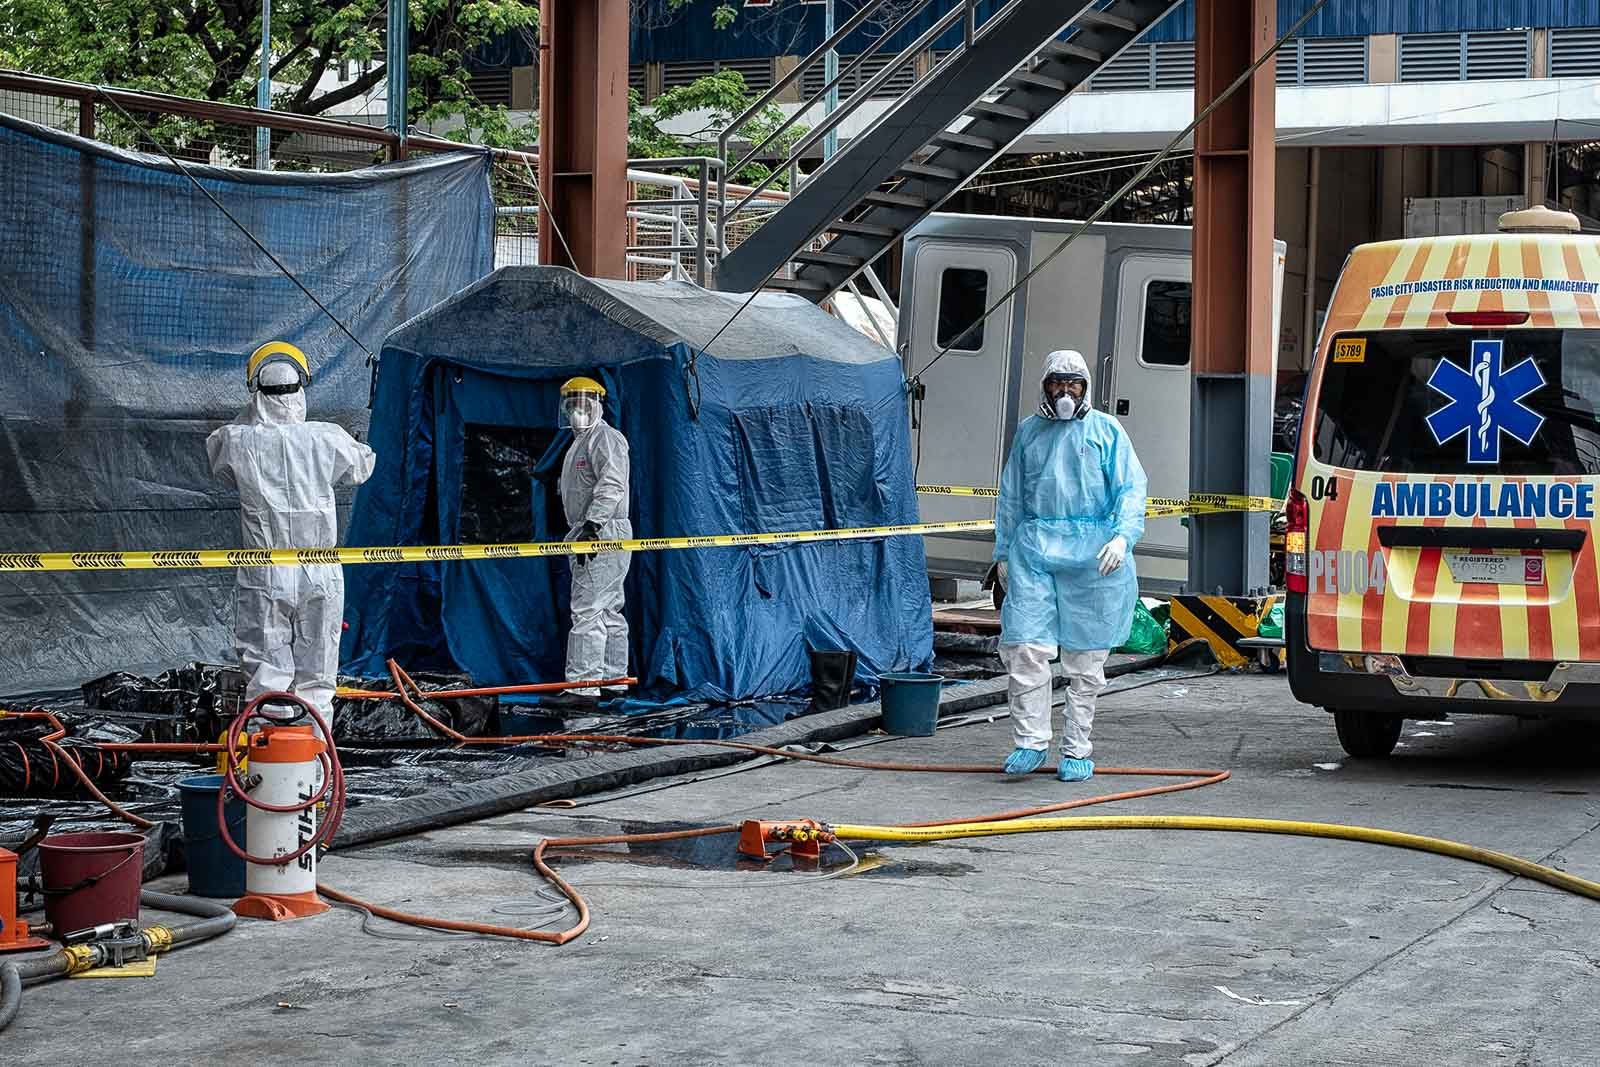 FULL GEAR. The Pasig Disaster Risk Reduction and Management Office decontaminates its ambulance personnel who helped transport a suspected COVID-19 case on March 15, 2020. Photo by Joser Dumbrigue/Rappler  